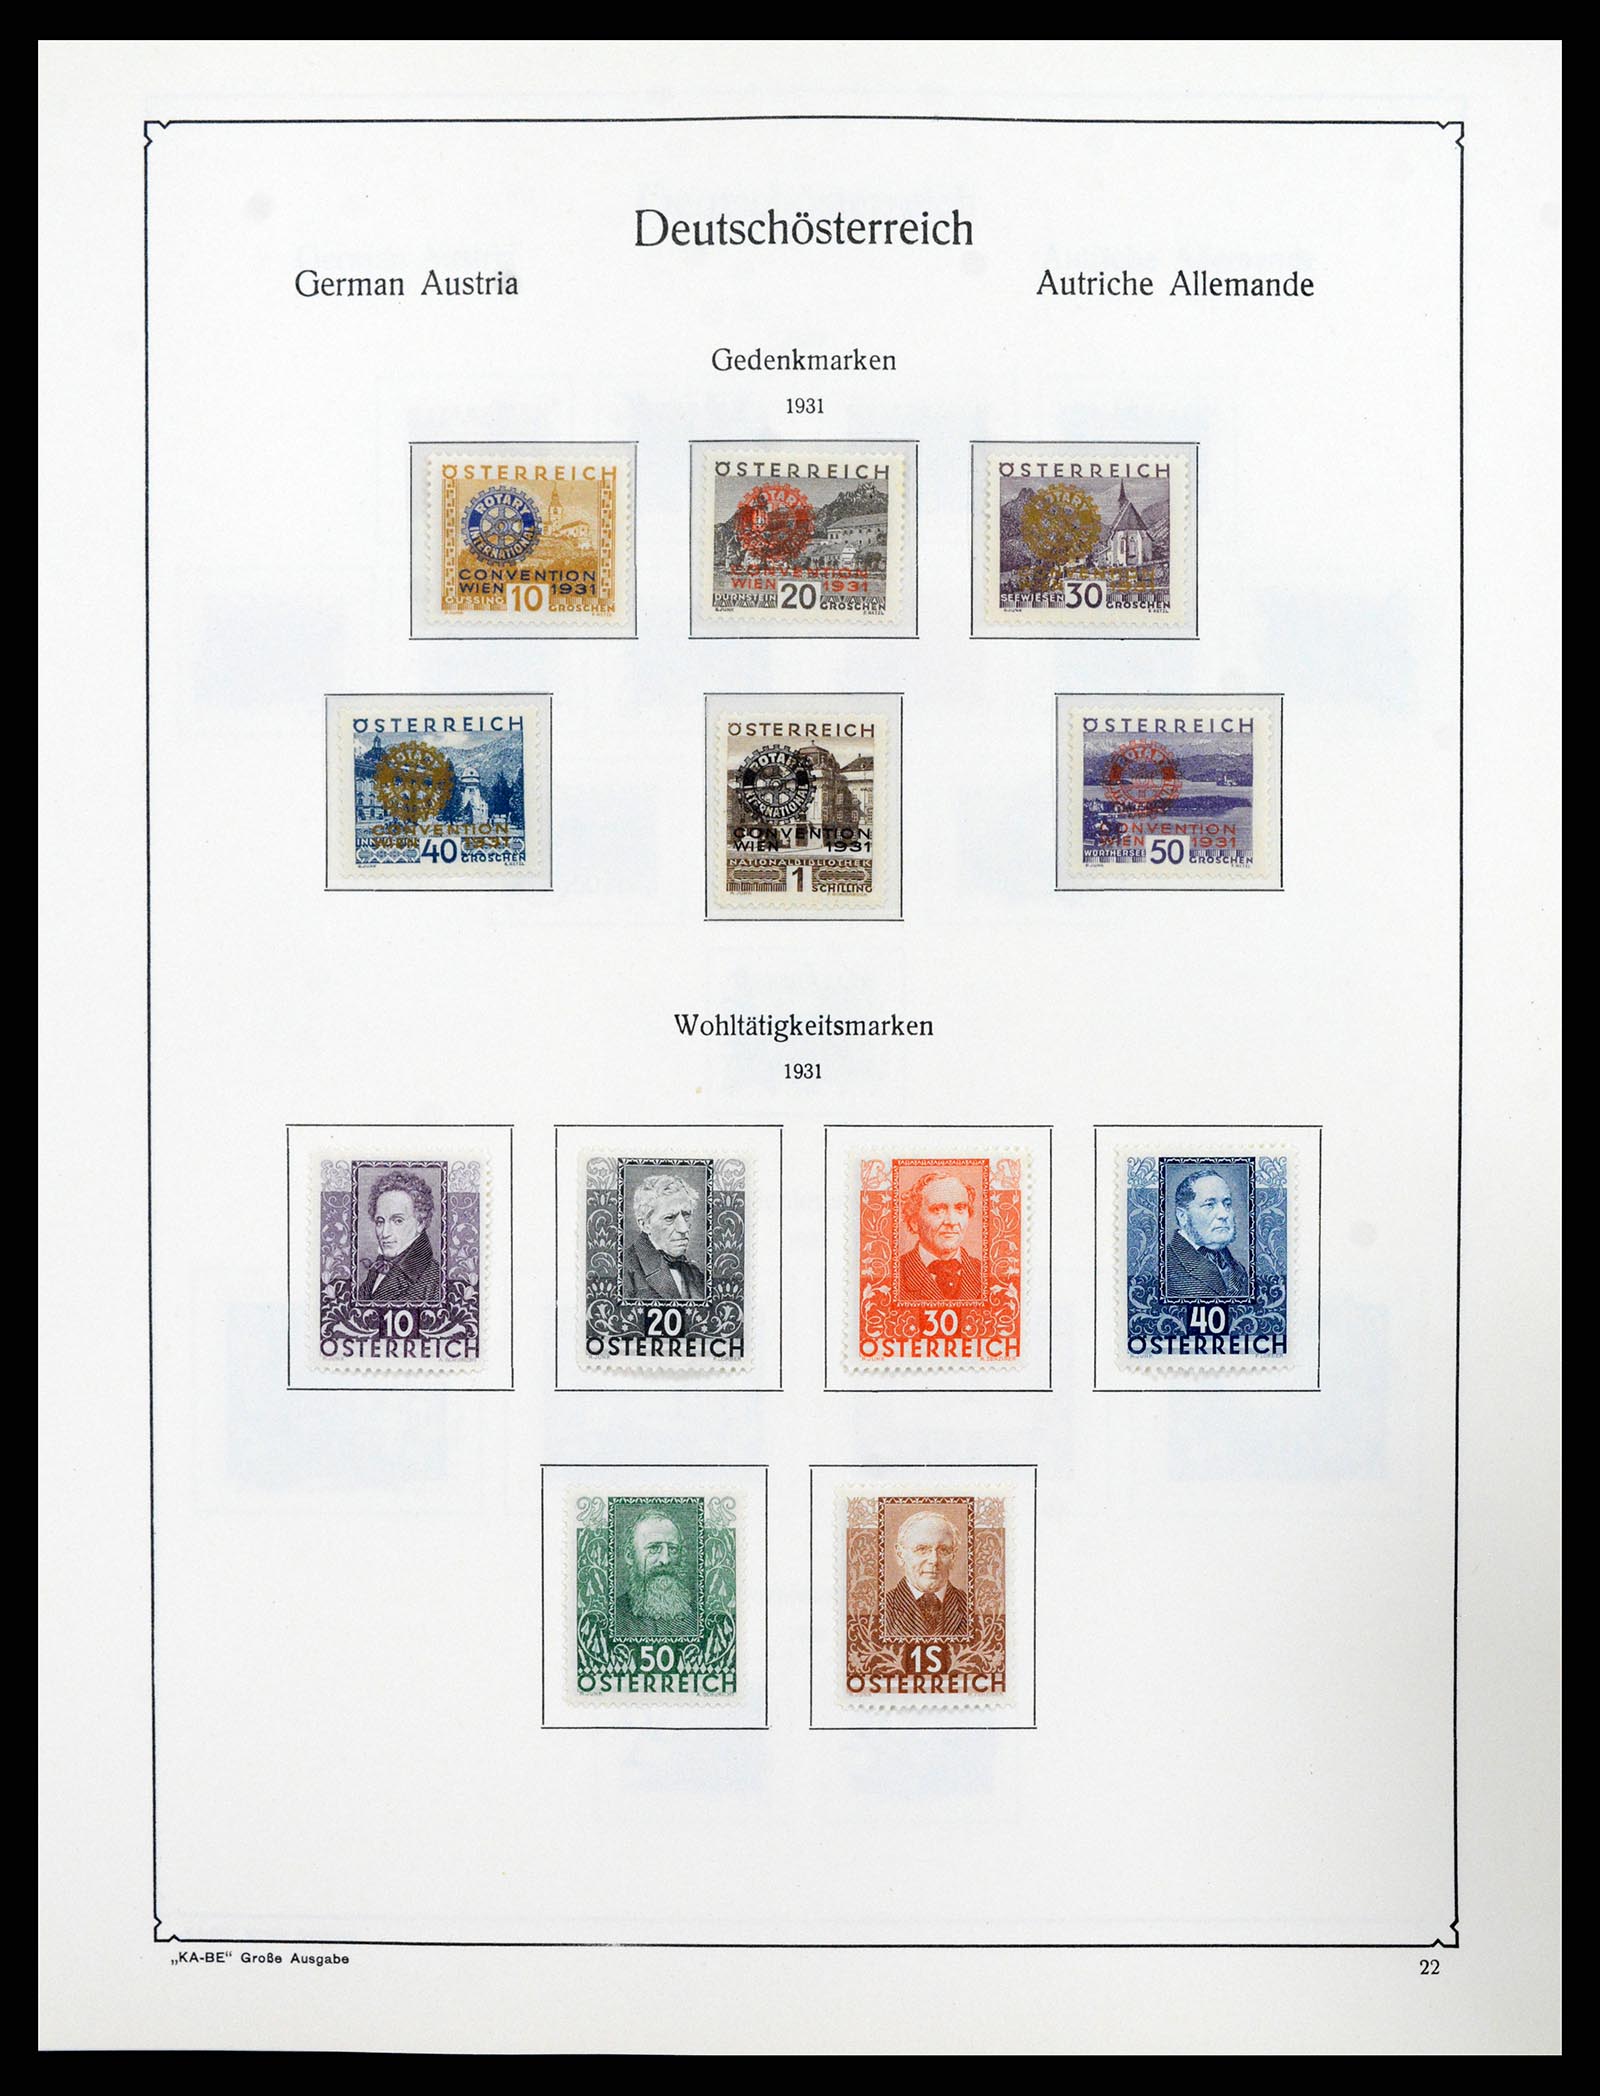 37960 080 - Stamp collection 37960 Austria and territories 1850-1984.